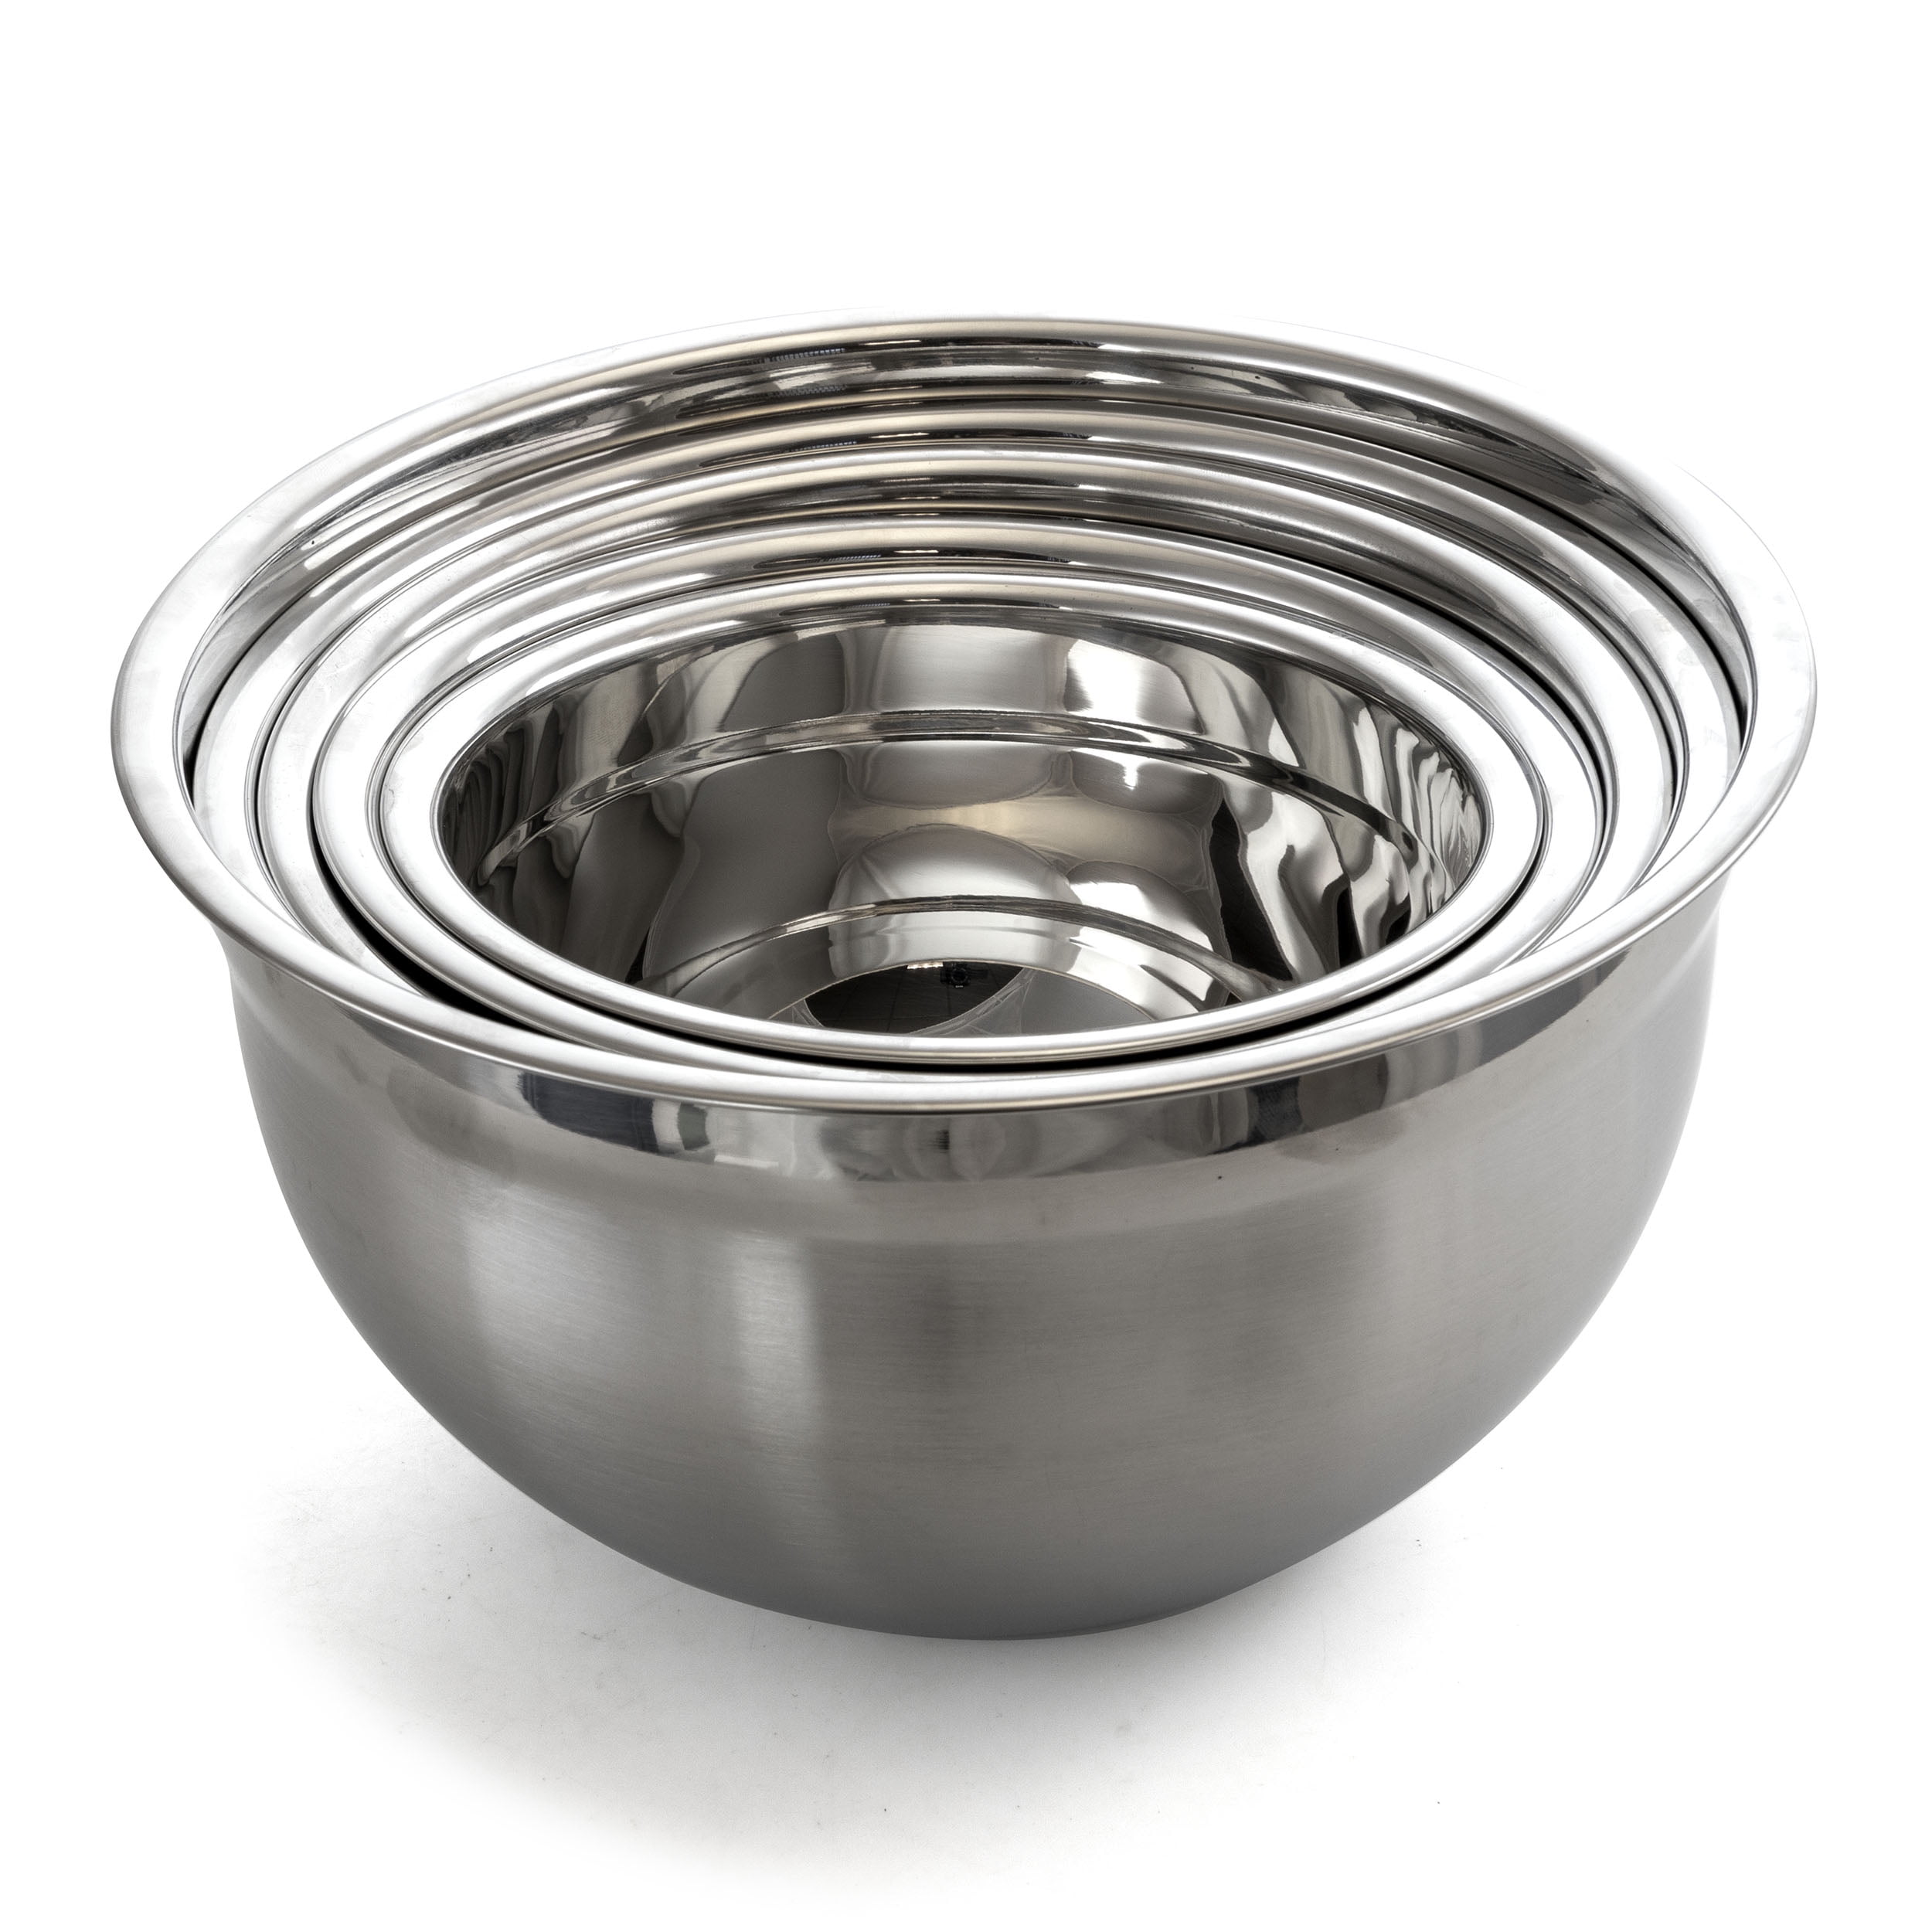 5pc Stainless Steel Non-Slip Mixing Bowls (no lids) Silver - Figmint™